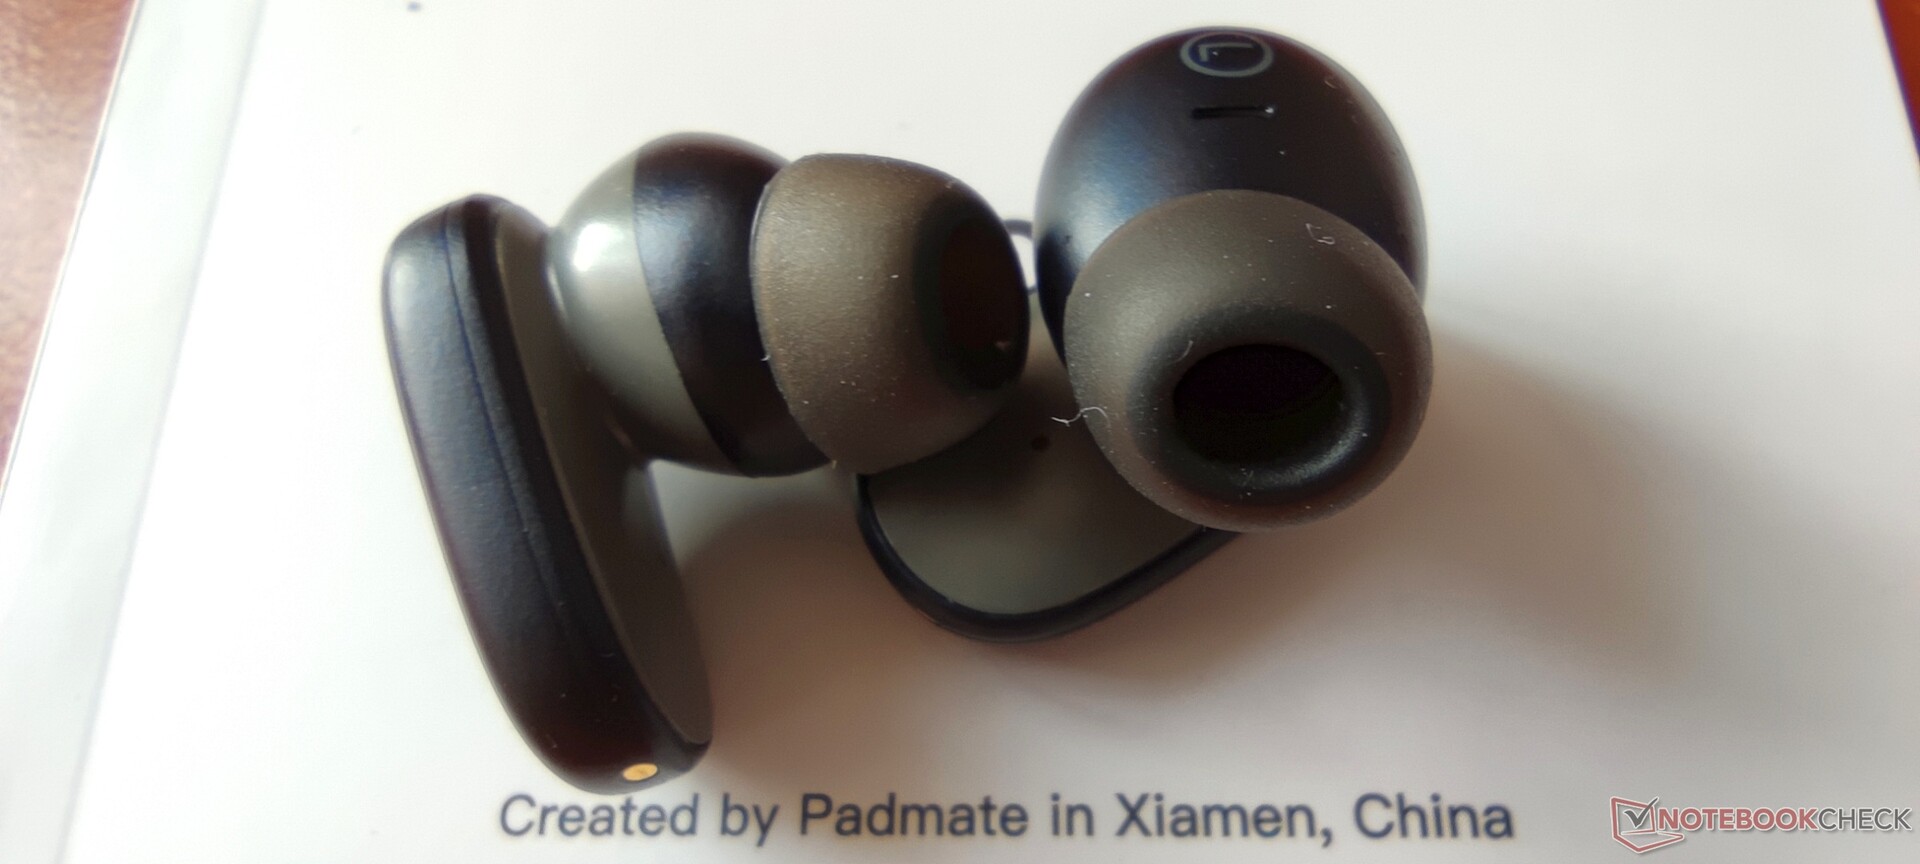 Pamu Z1 Pro hands-on: Capable ANC TWS earbuds with highs, lows, and a few  surprises -  News